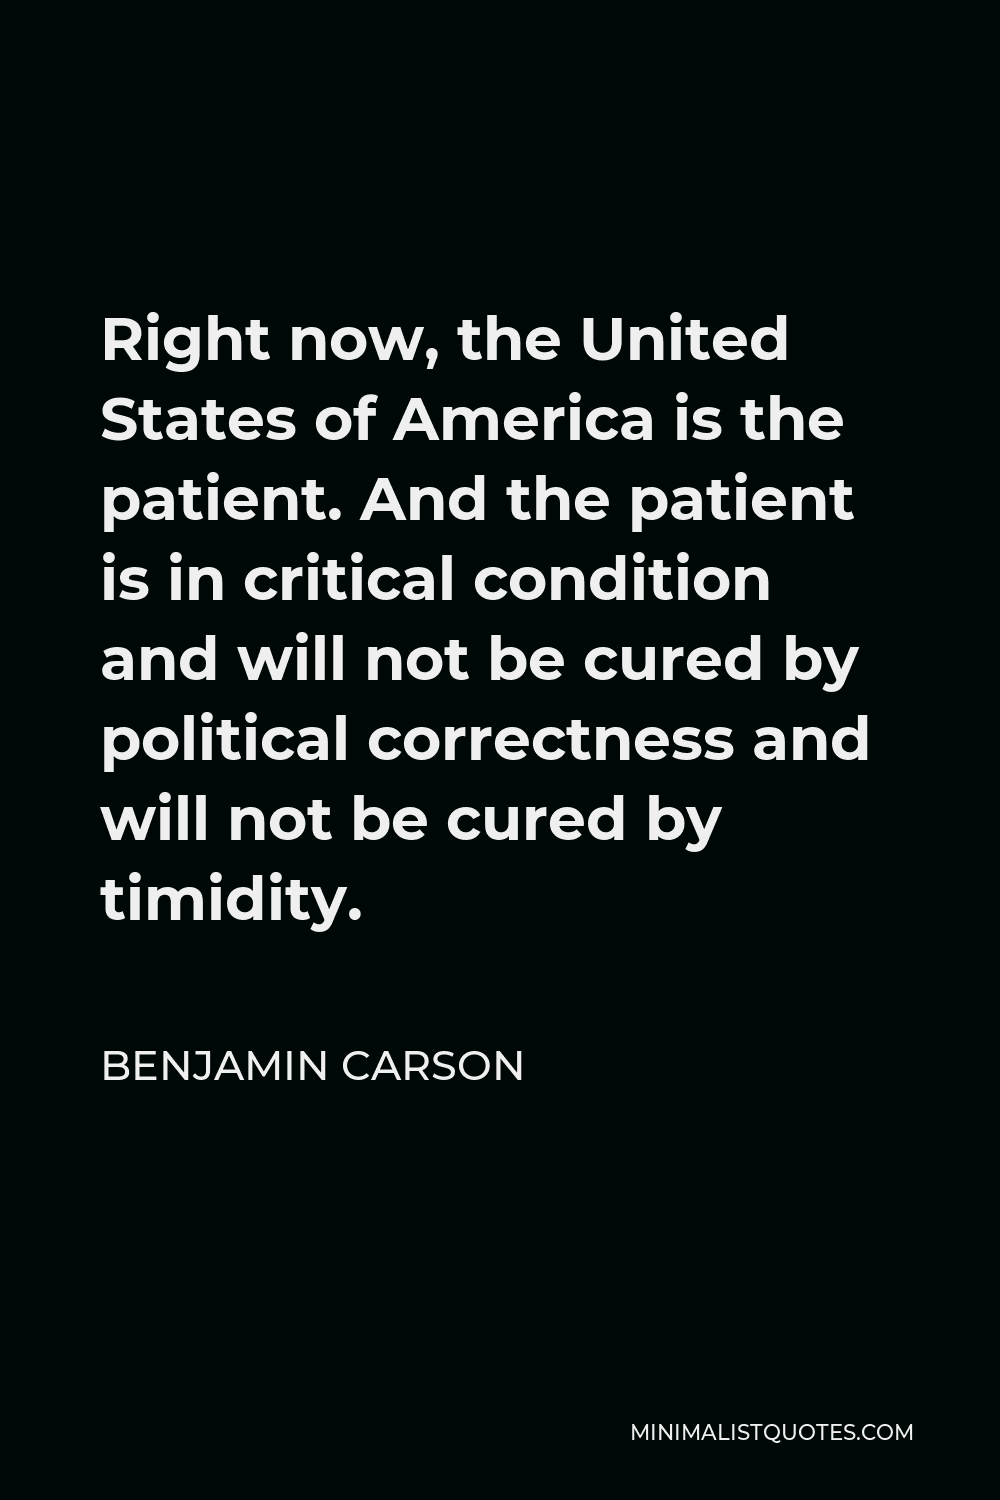 Benjamin Carson Quote - Right now, the United States of America is the patient. And the patient is in critical condition and will not be cured by political correctness and will not be cured by timidity.